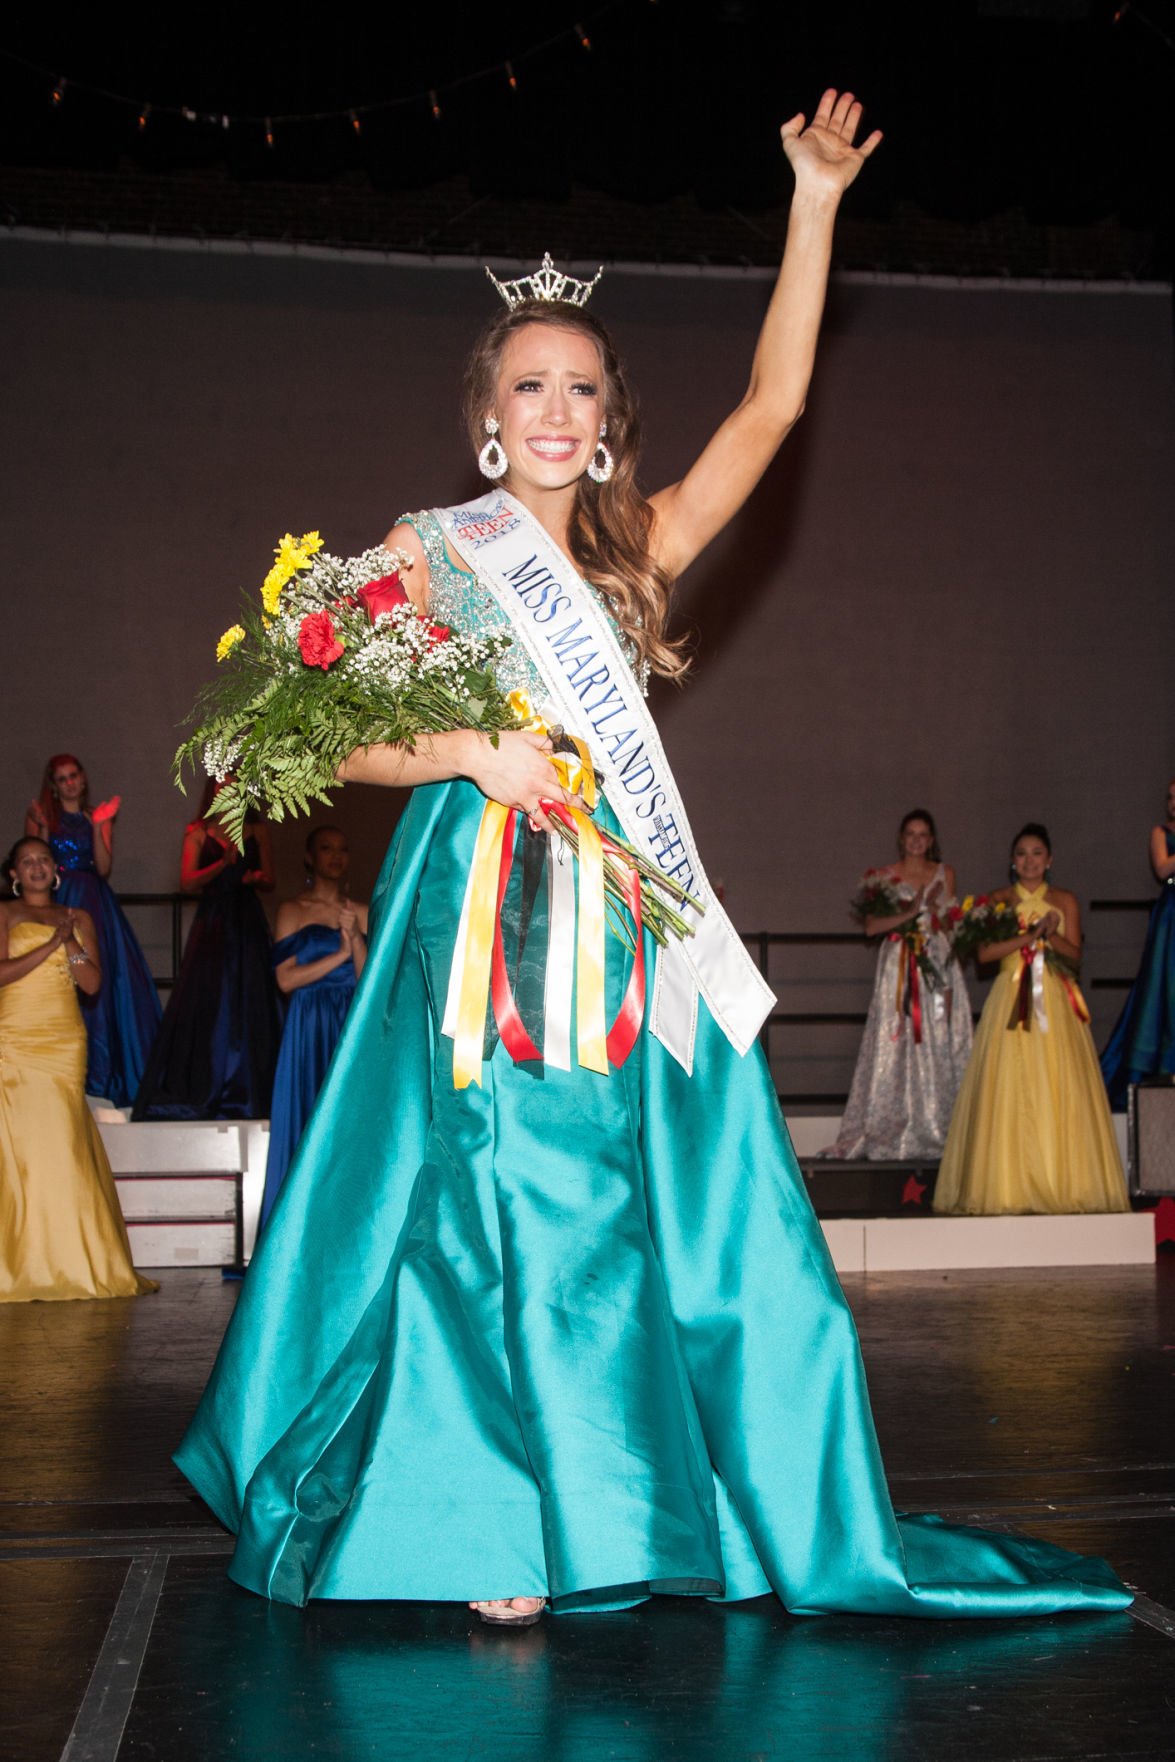 Local teen vying for Miss America's Outstanding Teen title | Spotlight ...